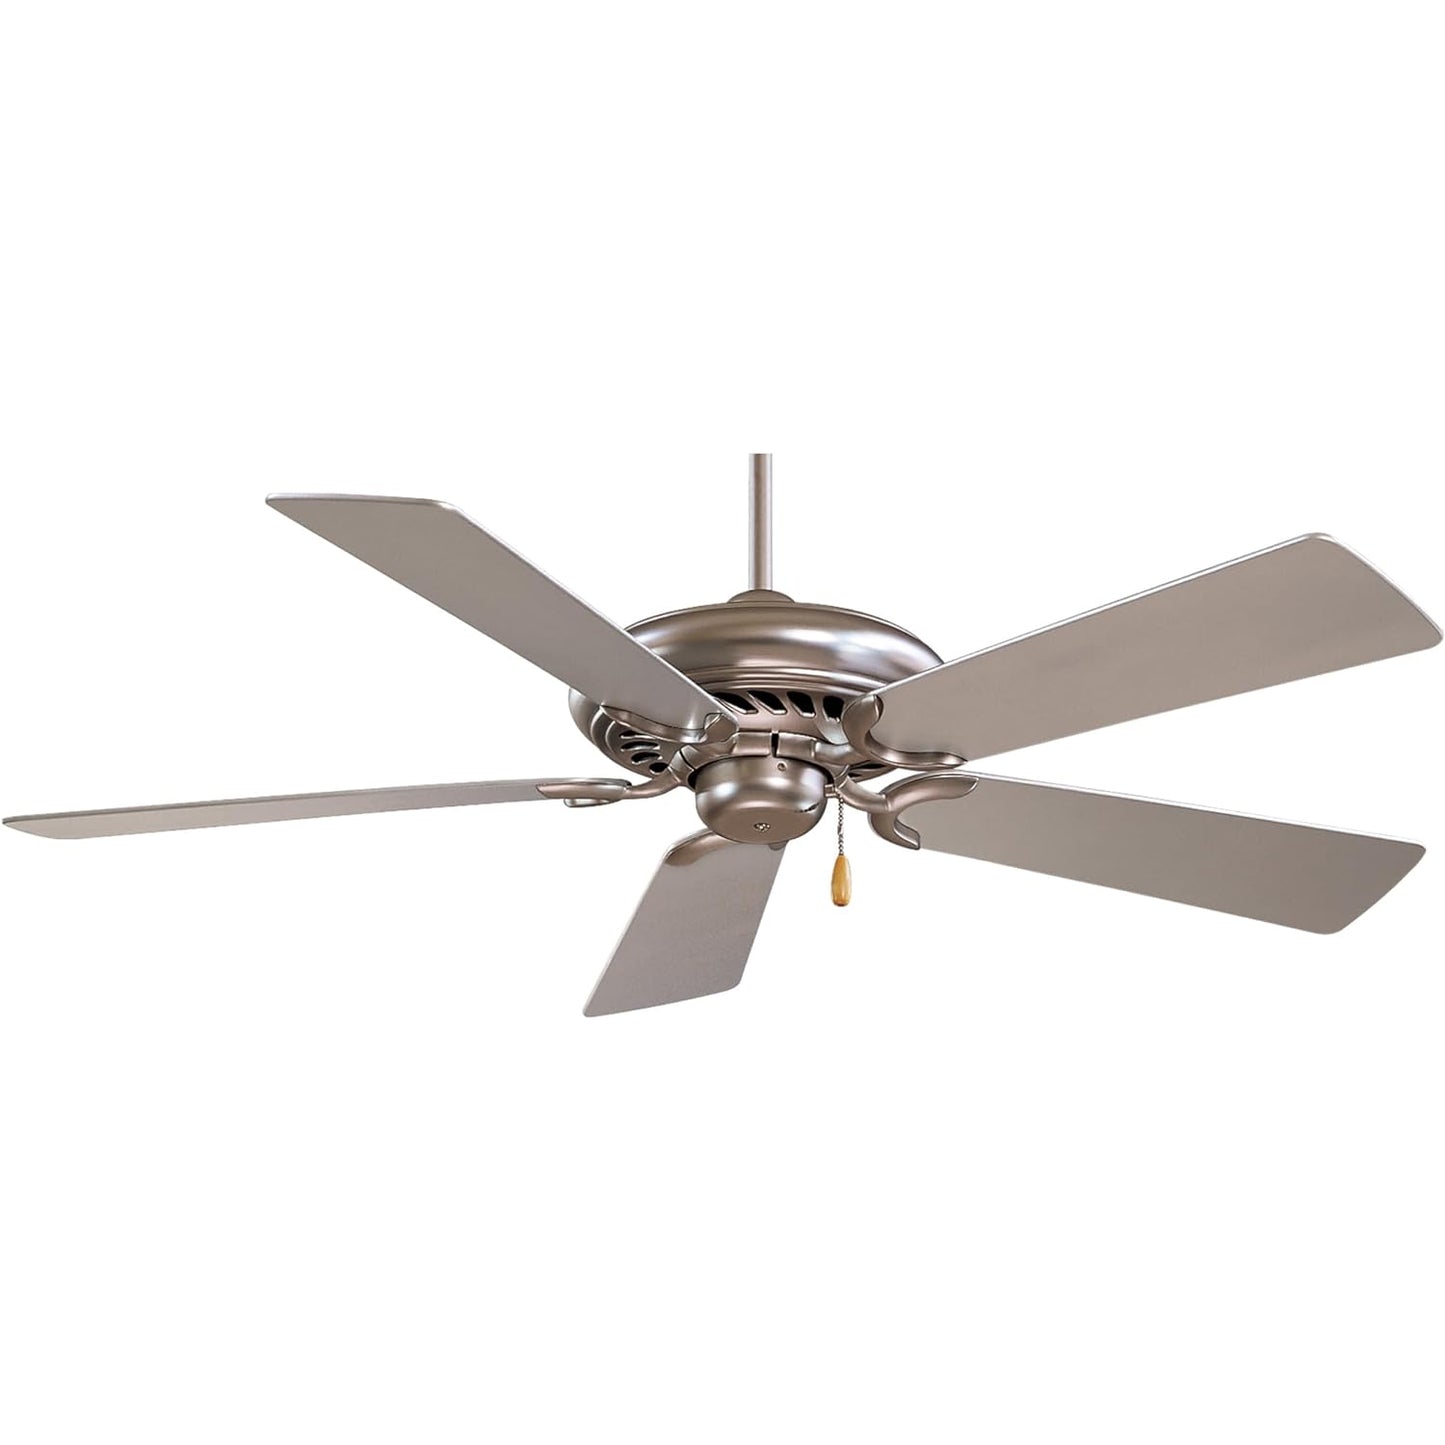 Minka-Aire F568-BS Supra 52 Inch Pull Chain Ceiling Fan - Brushed Steel